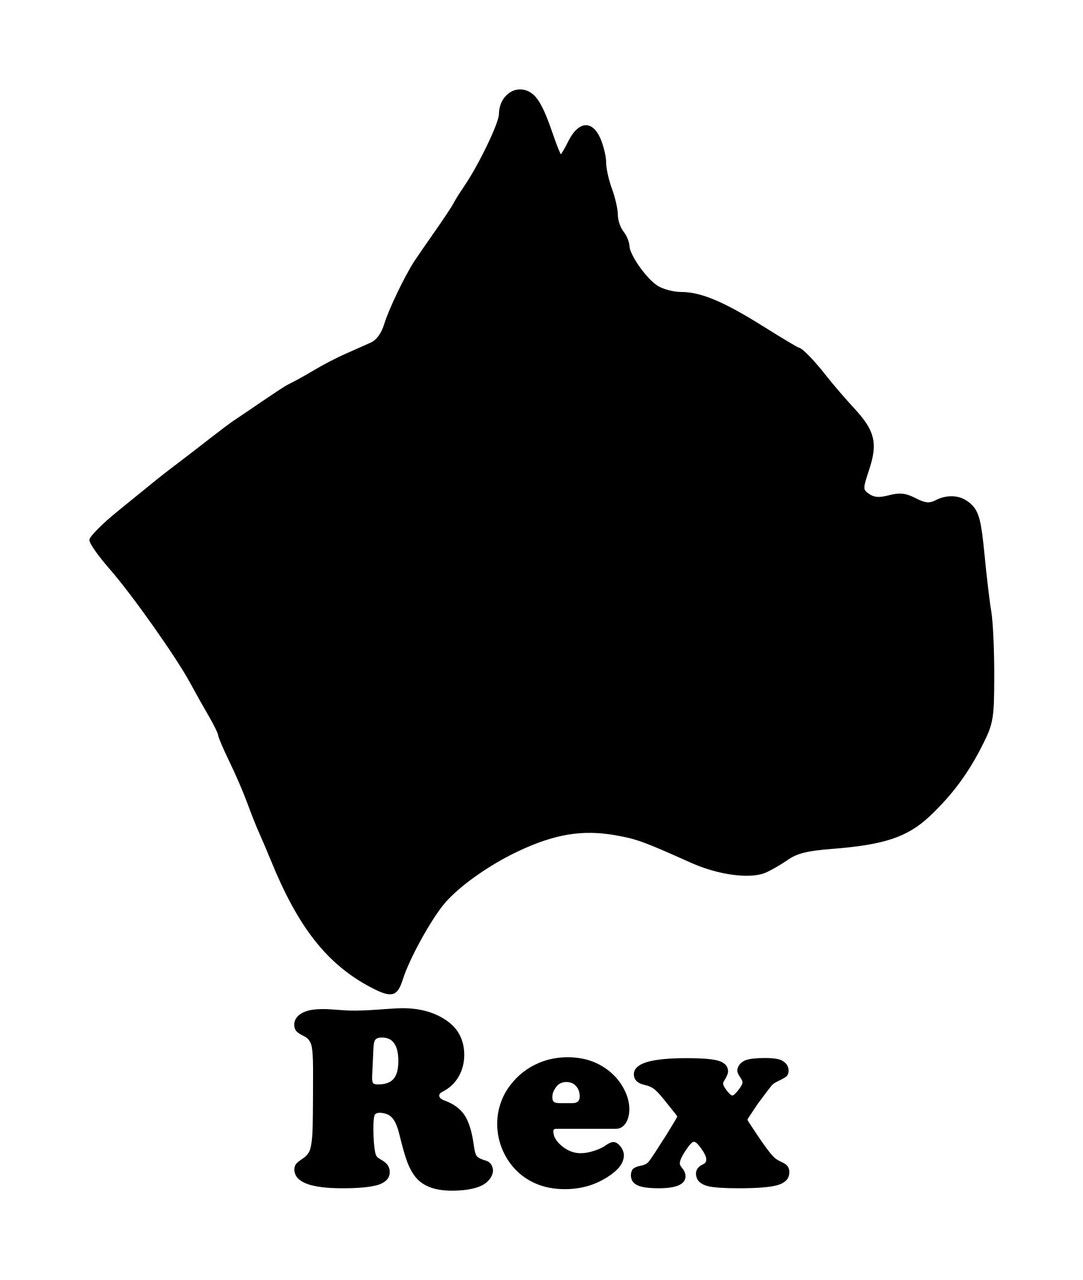 BOXER Dog Head with Personalized Name Vinyl Decal Sticker - Puppy Dog Profile Silhouette